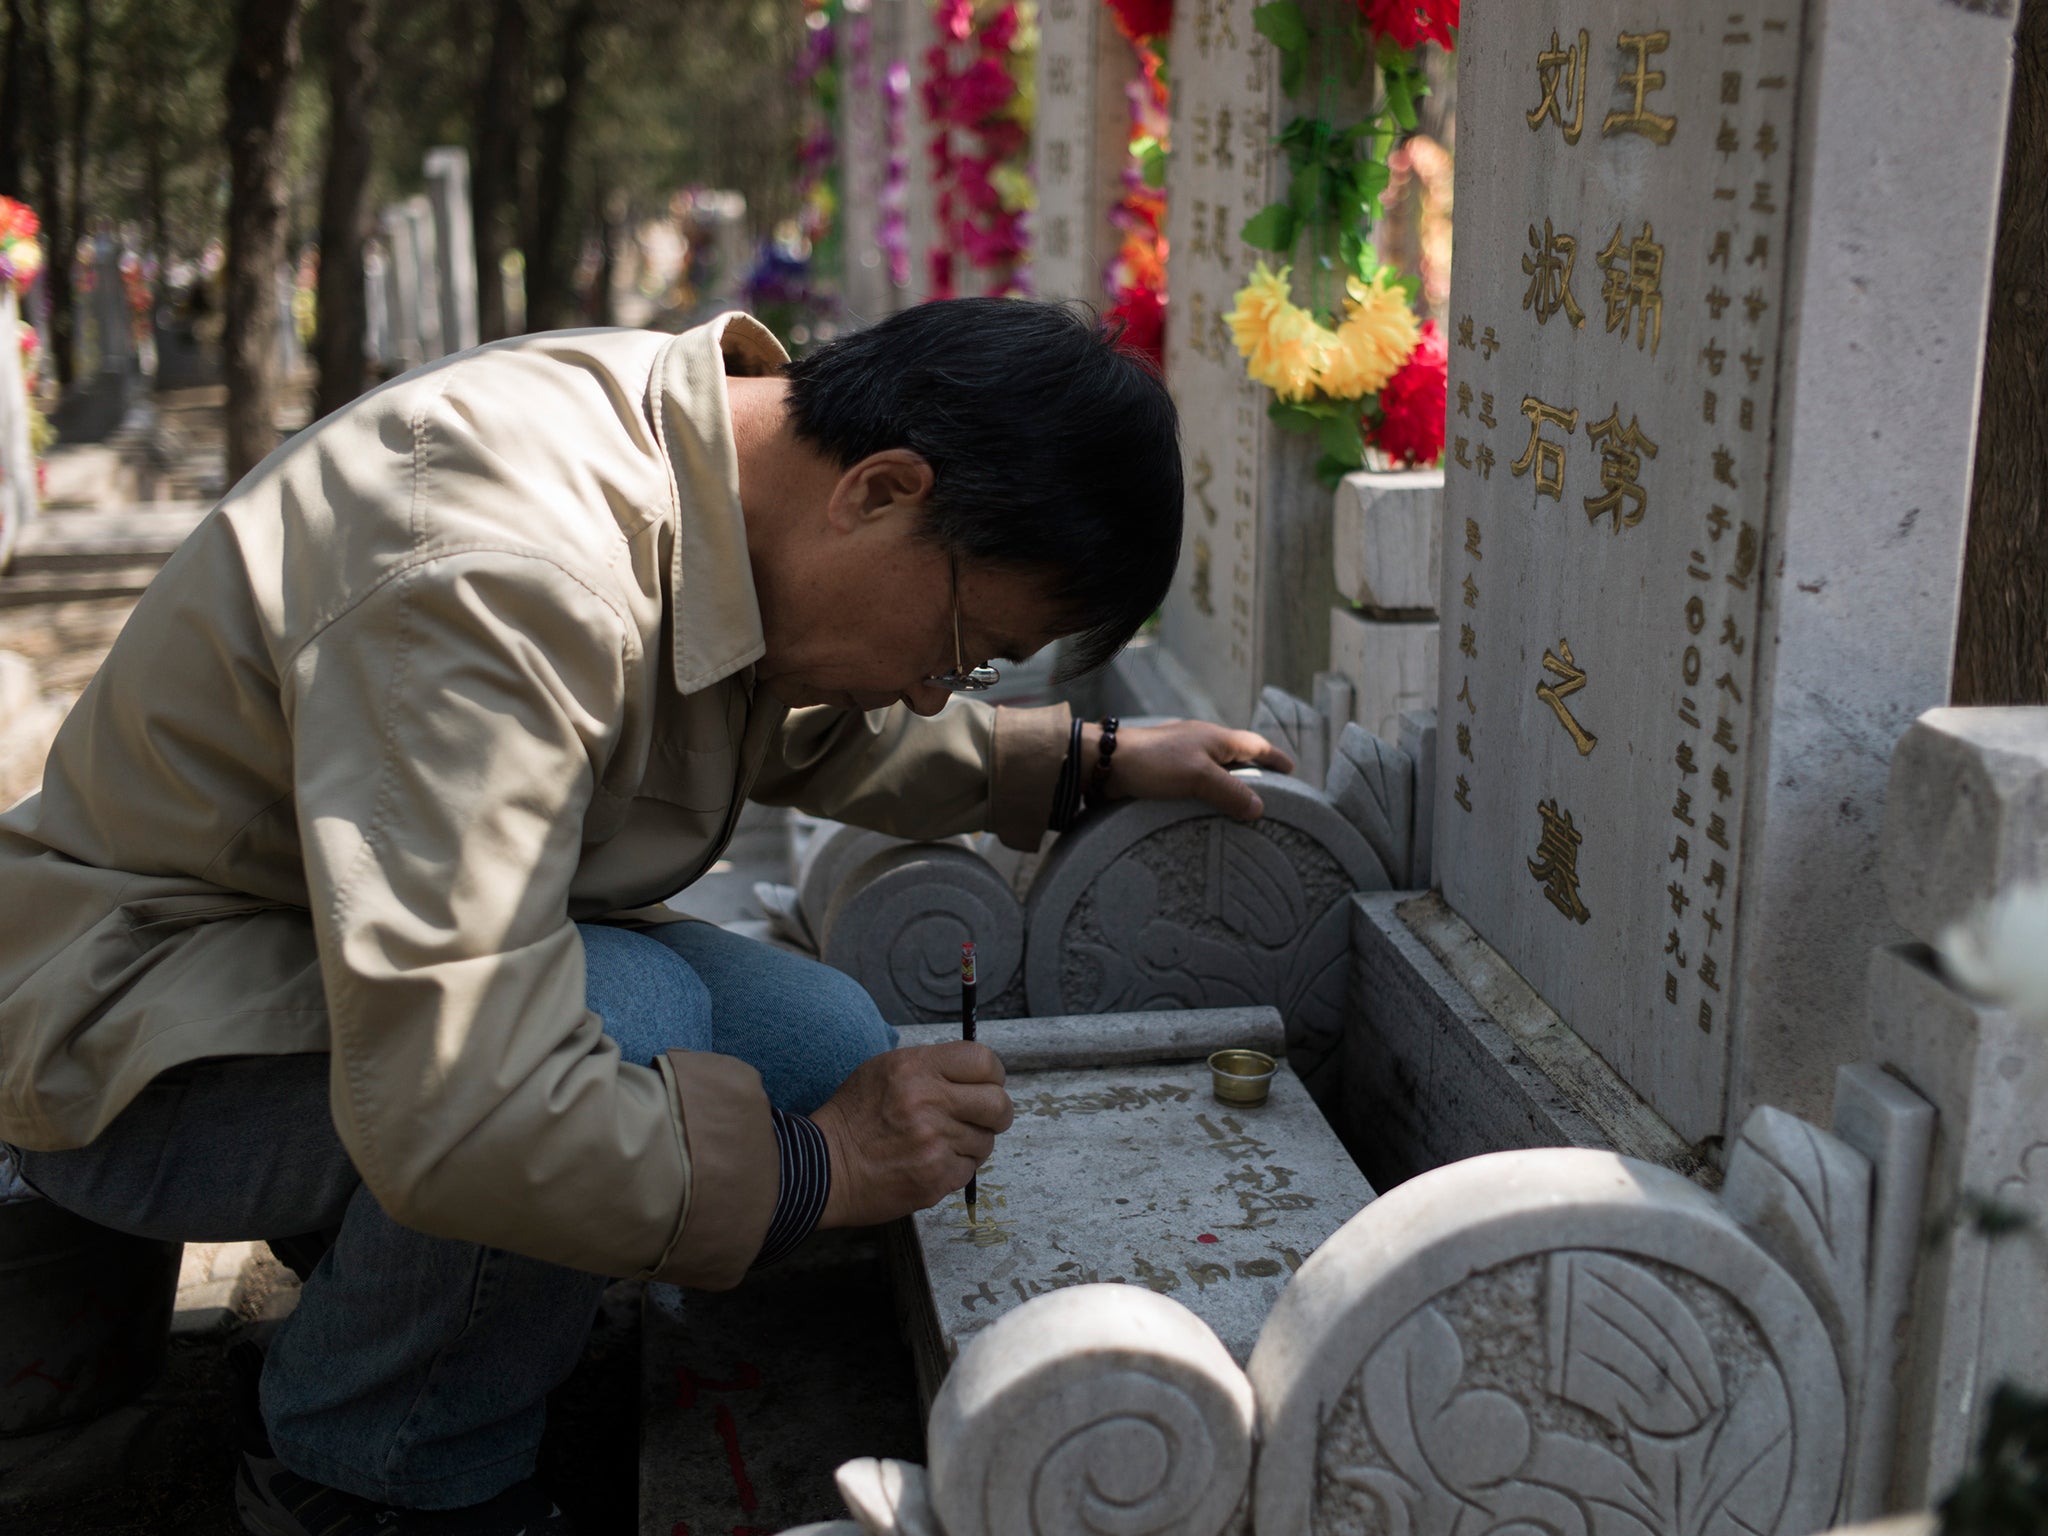 A man repaints the letters on a grave during the 'Qingming' festival, or Tomb Sweeping Day, at a cemetary in Babaoshan in Beijing